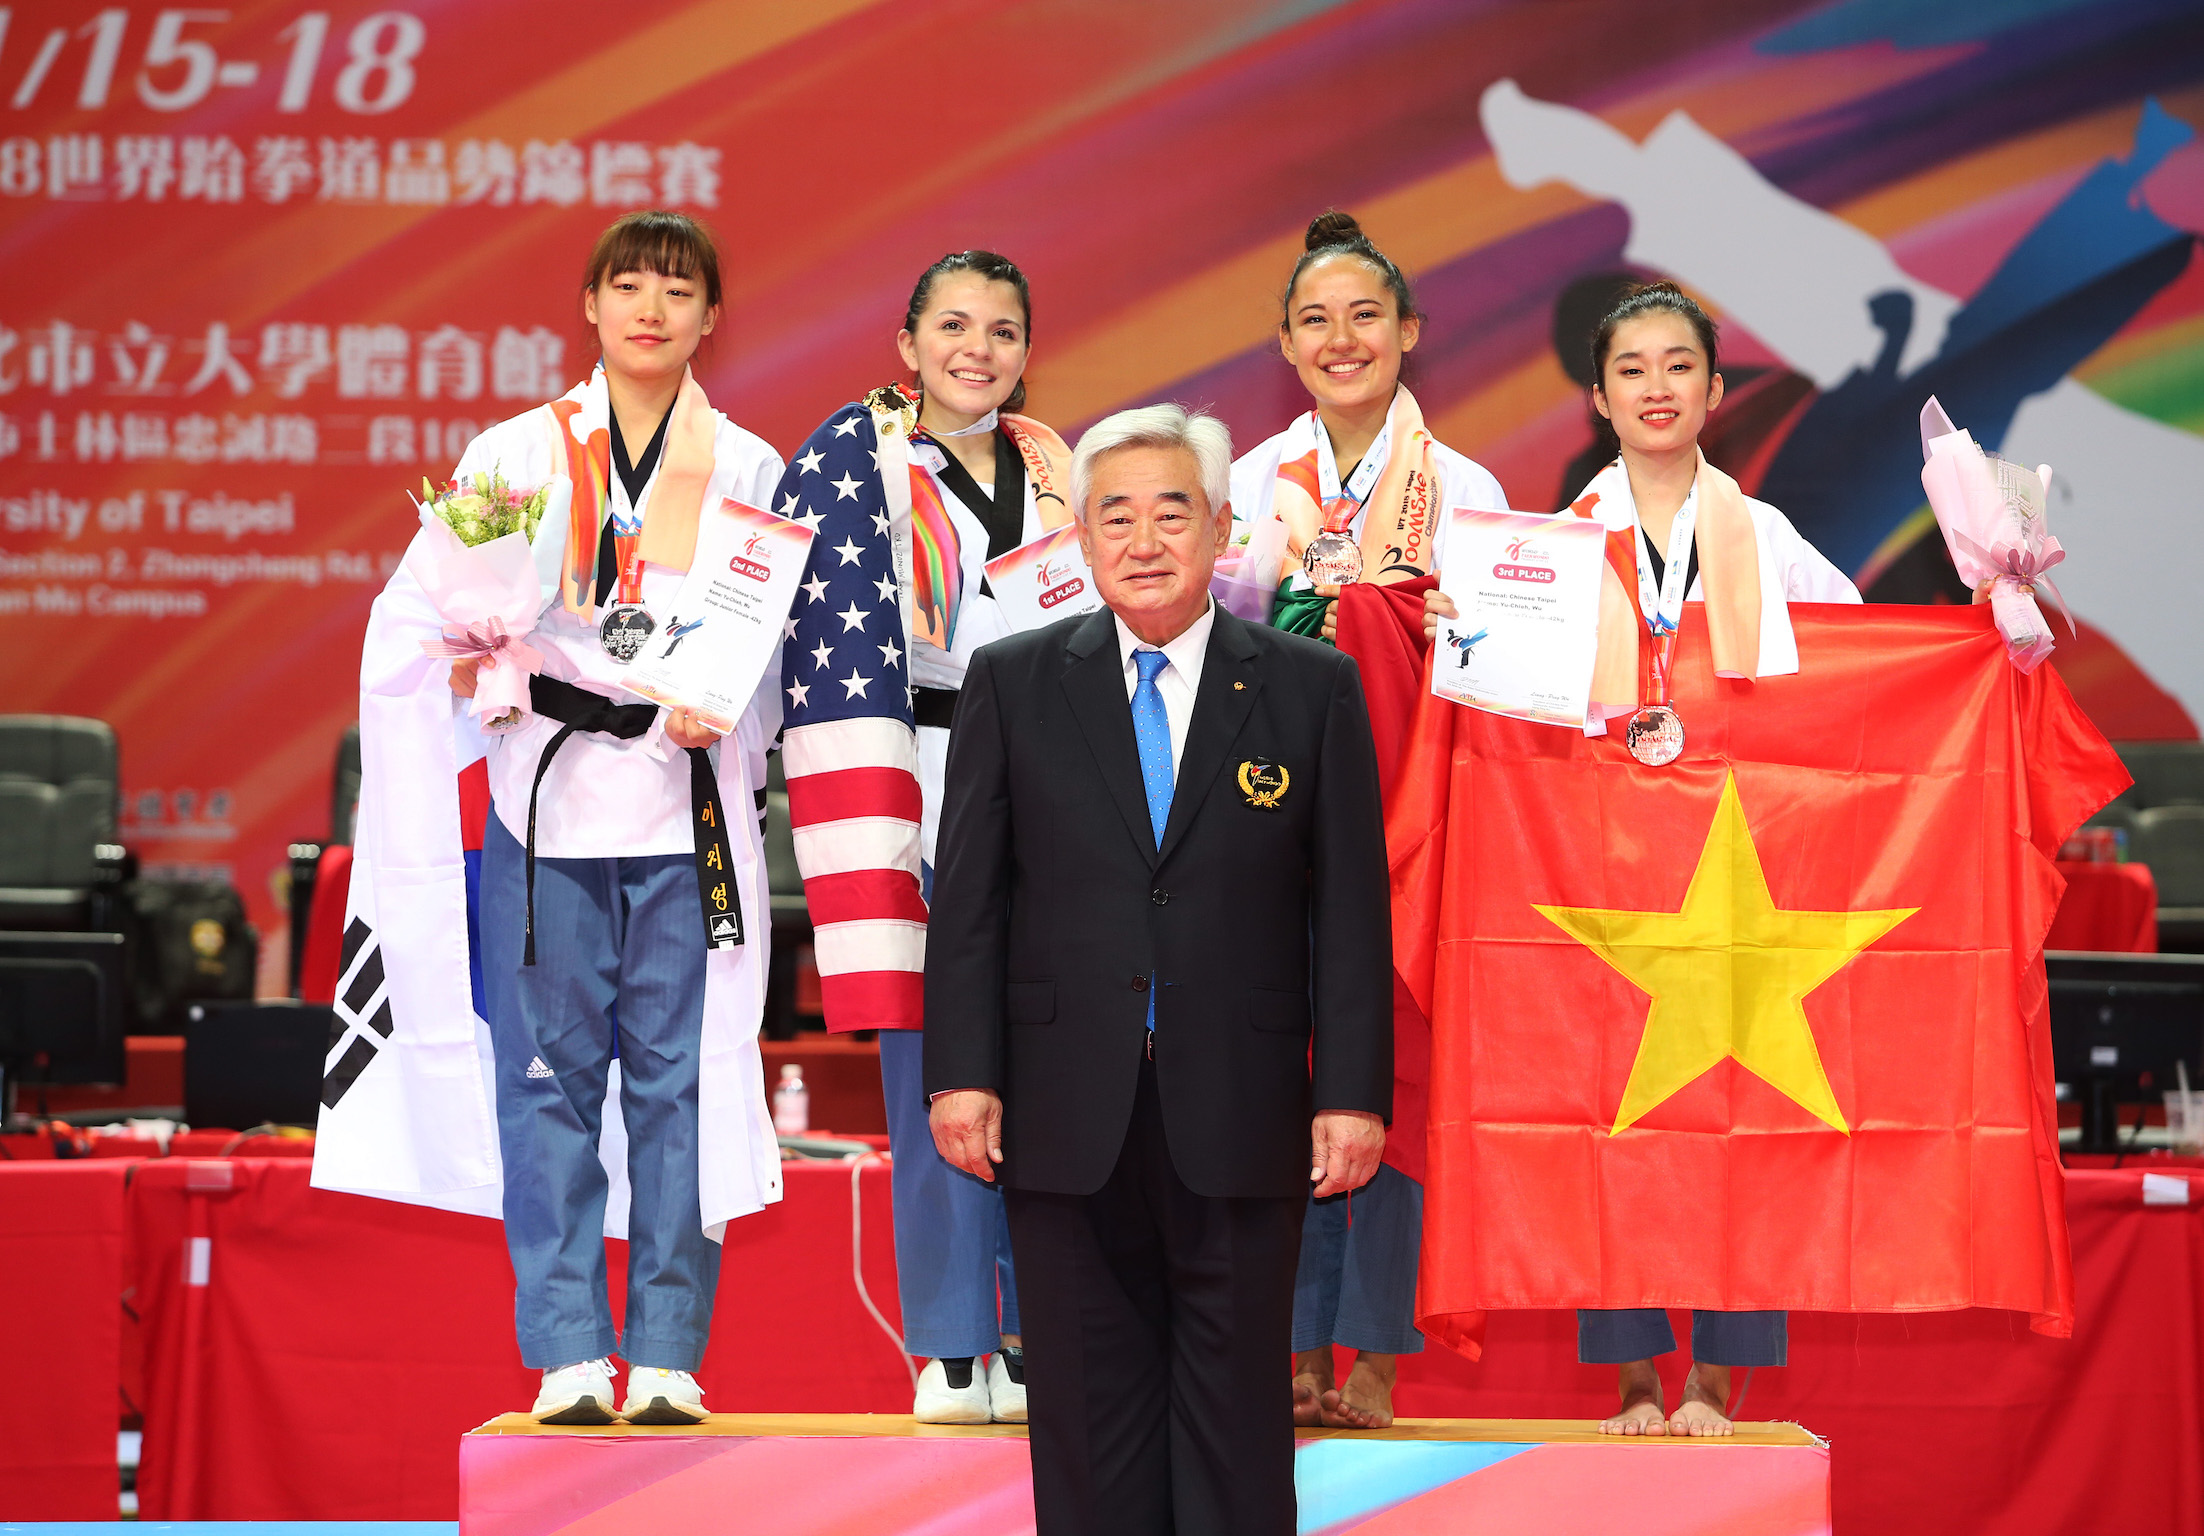 Awarding ceremony of Freestyle Individual Female Over 17 with WT President Chungwon Choue at Day 1